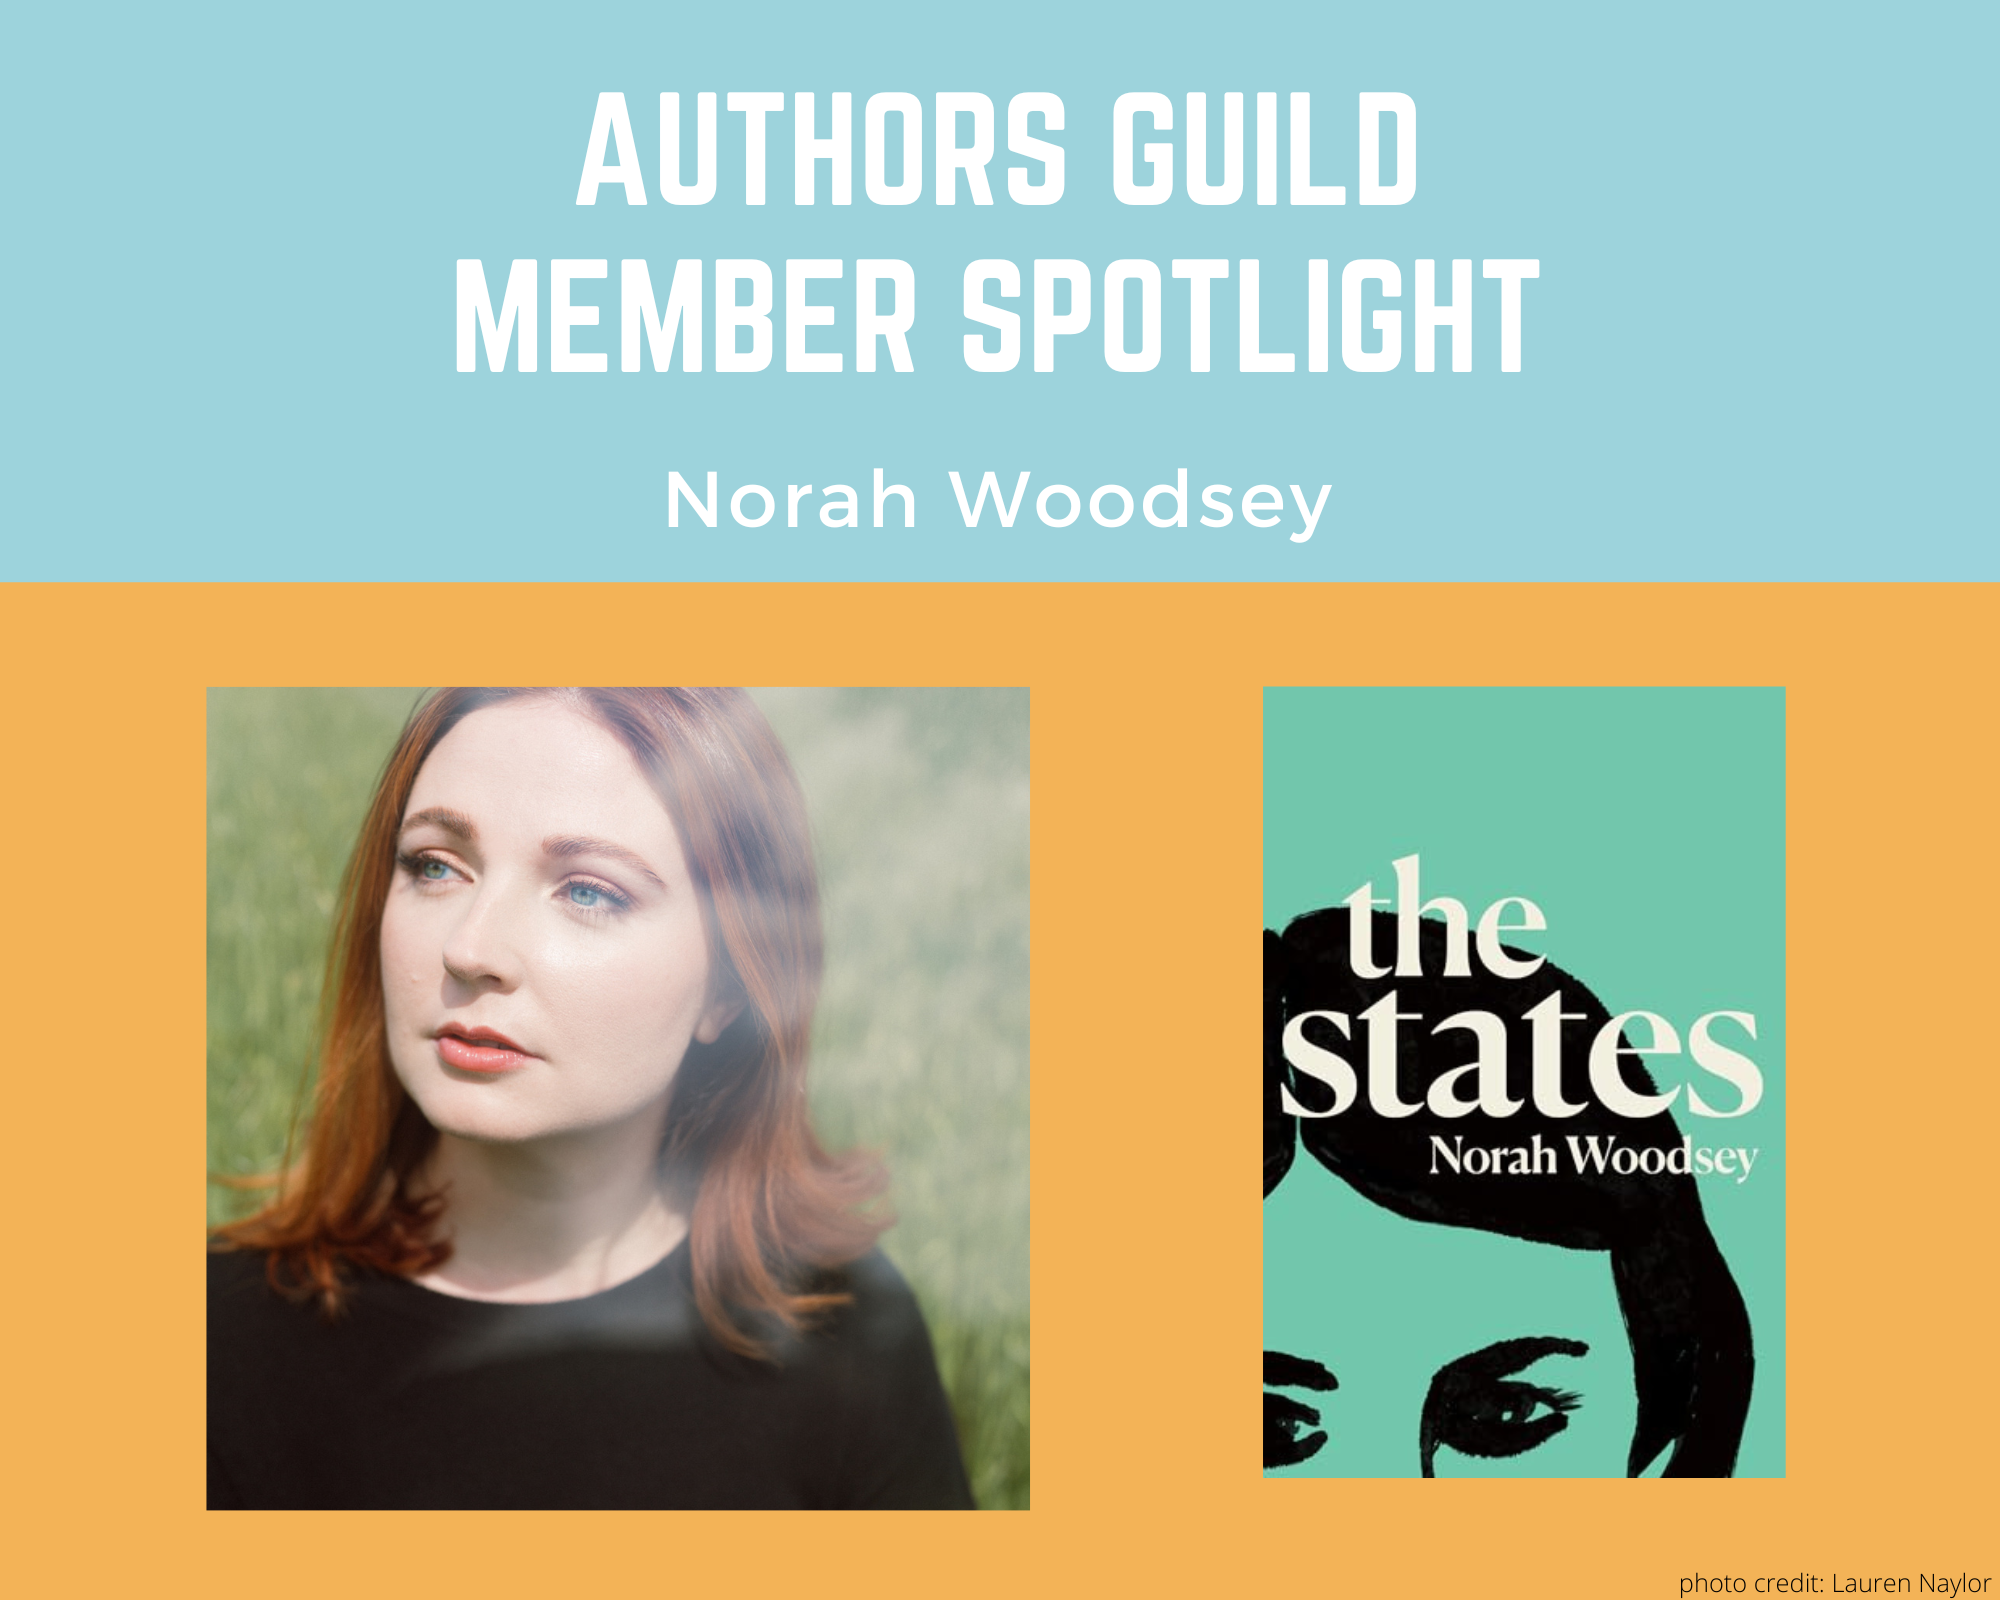 author Norah Woodsey and her book The States